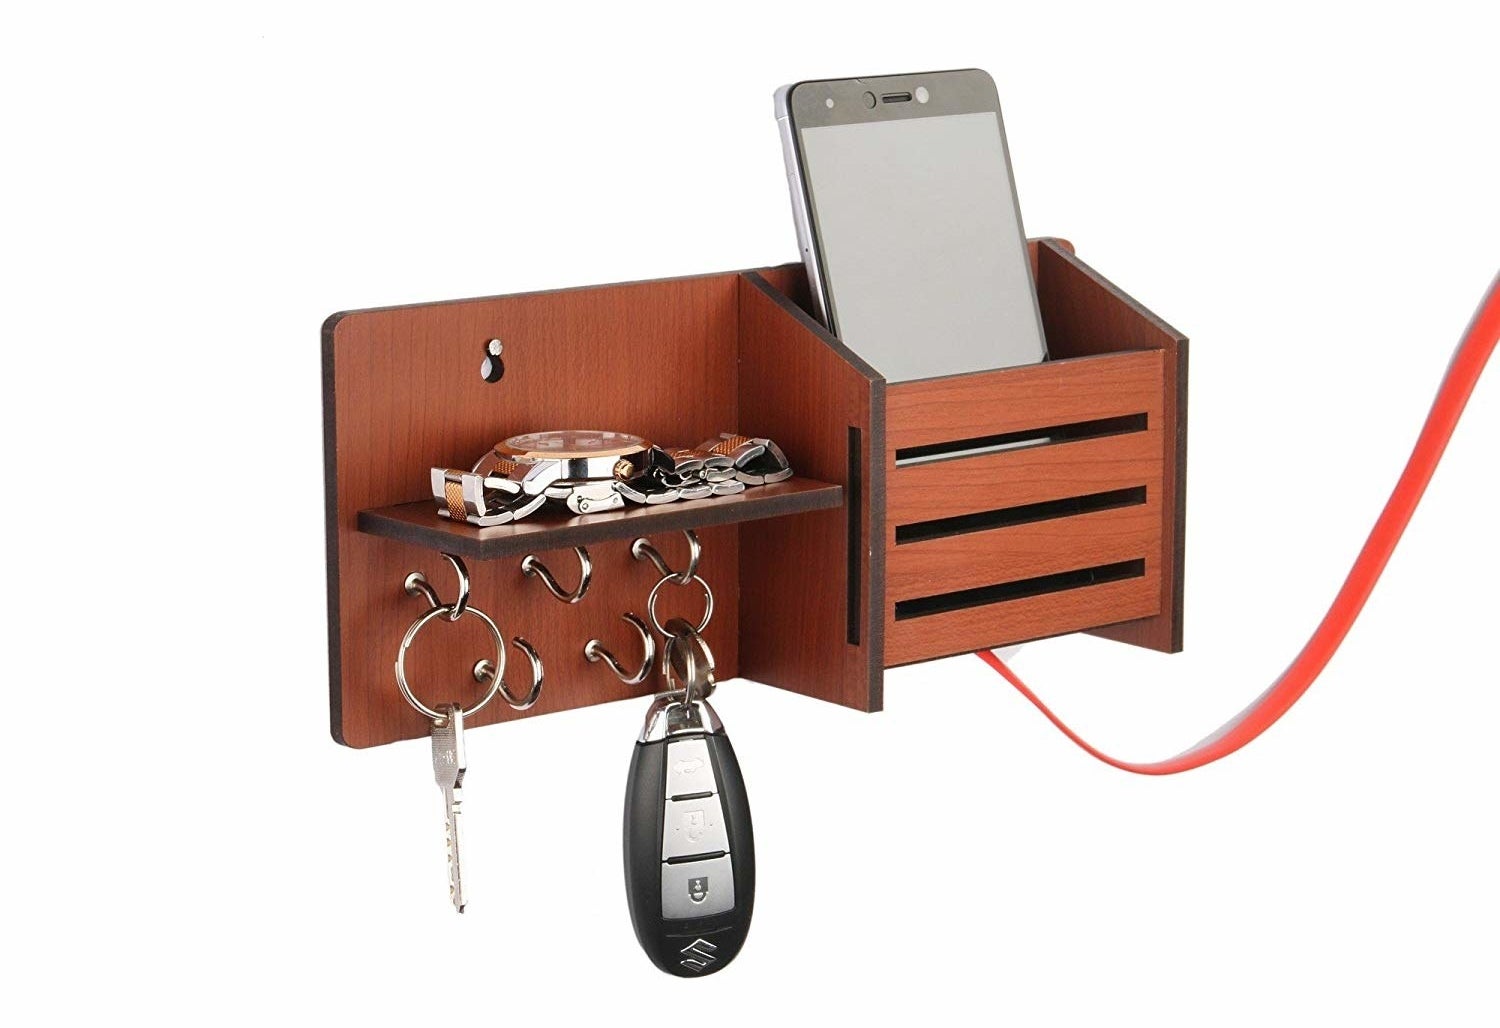 A key holder with keys, a watch, and a phone placed on it